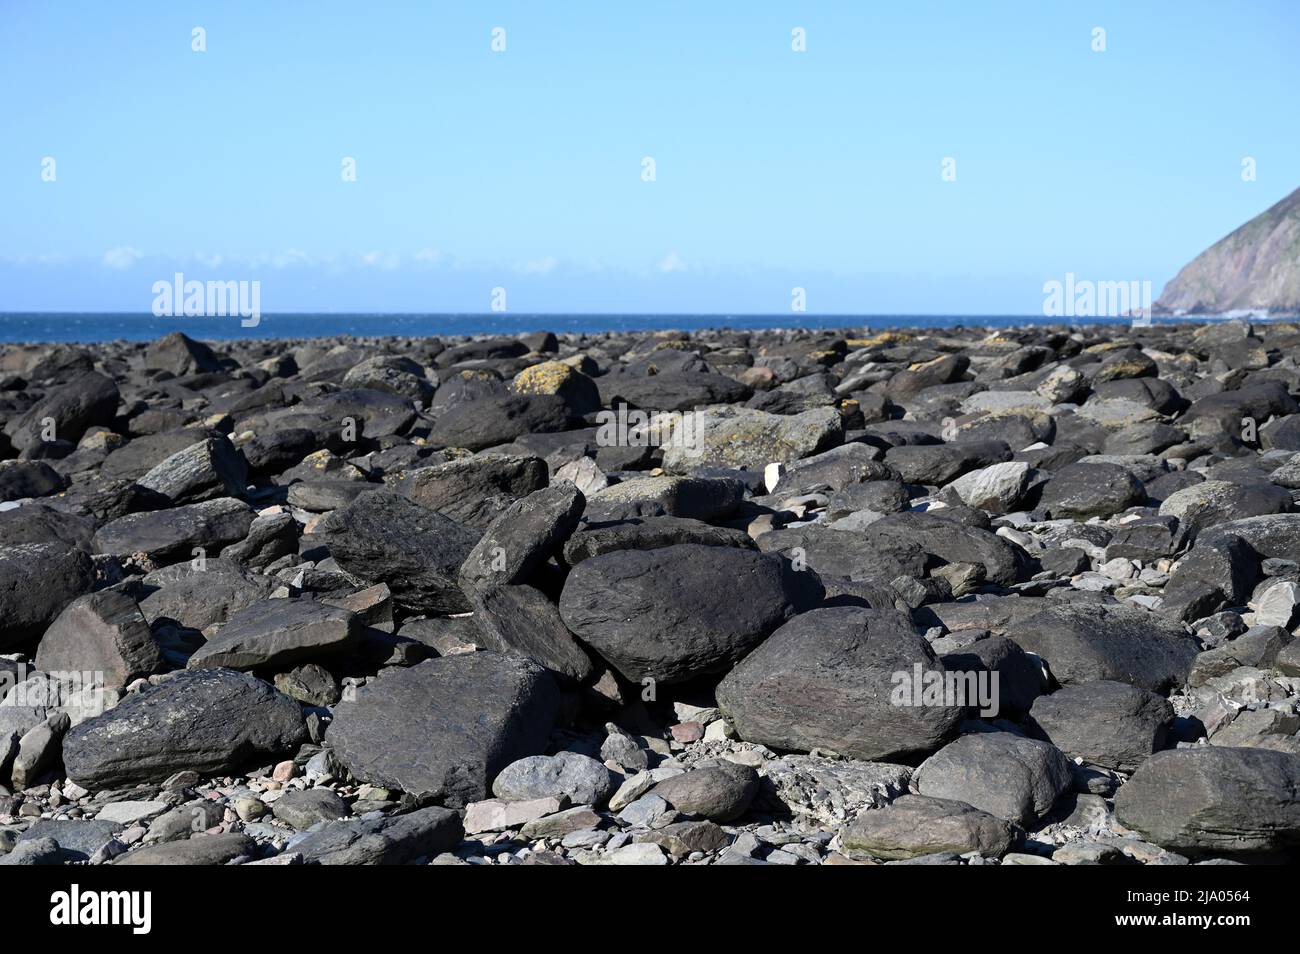 Rocks, stones on the Devon beach during a sunny day Stock Photo